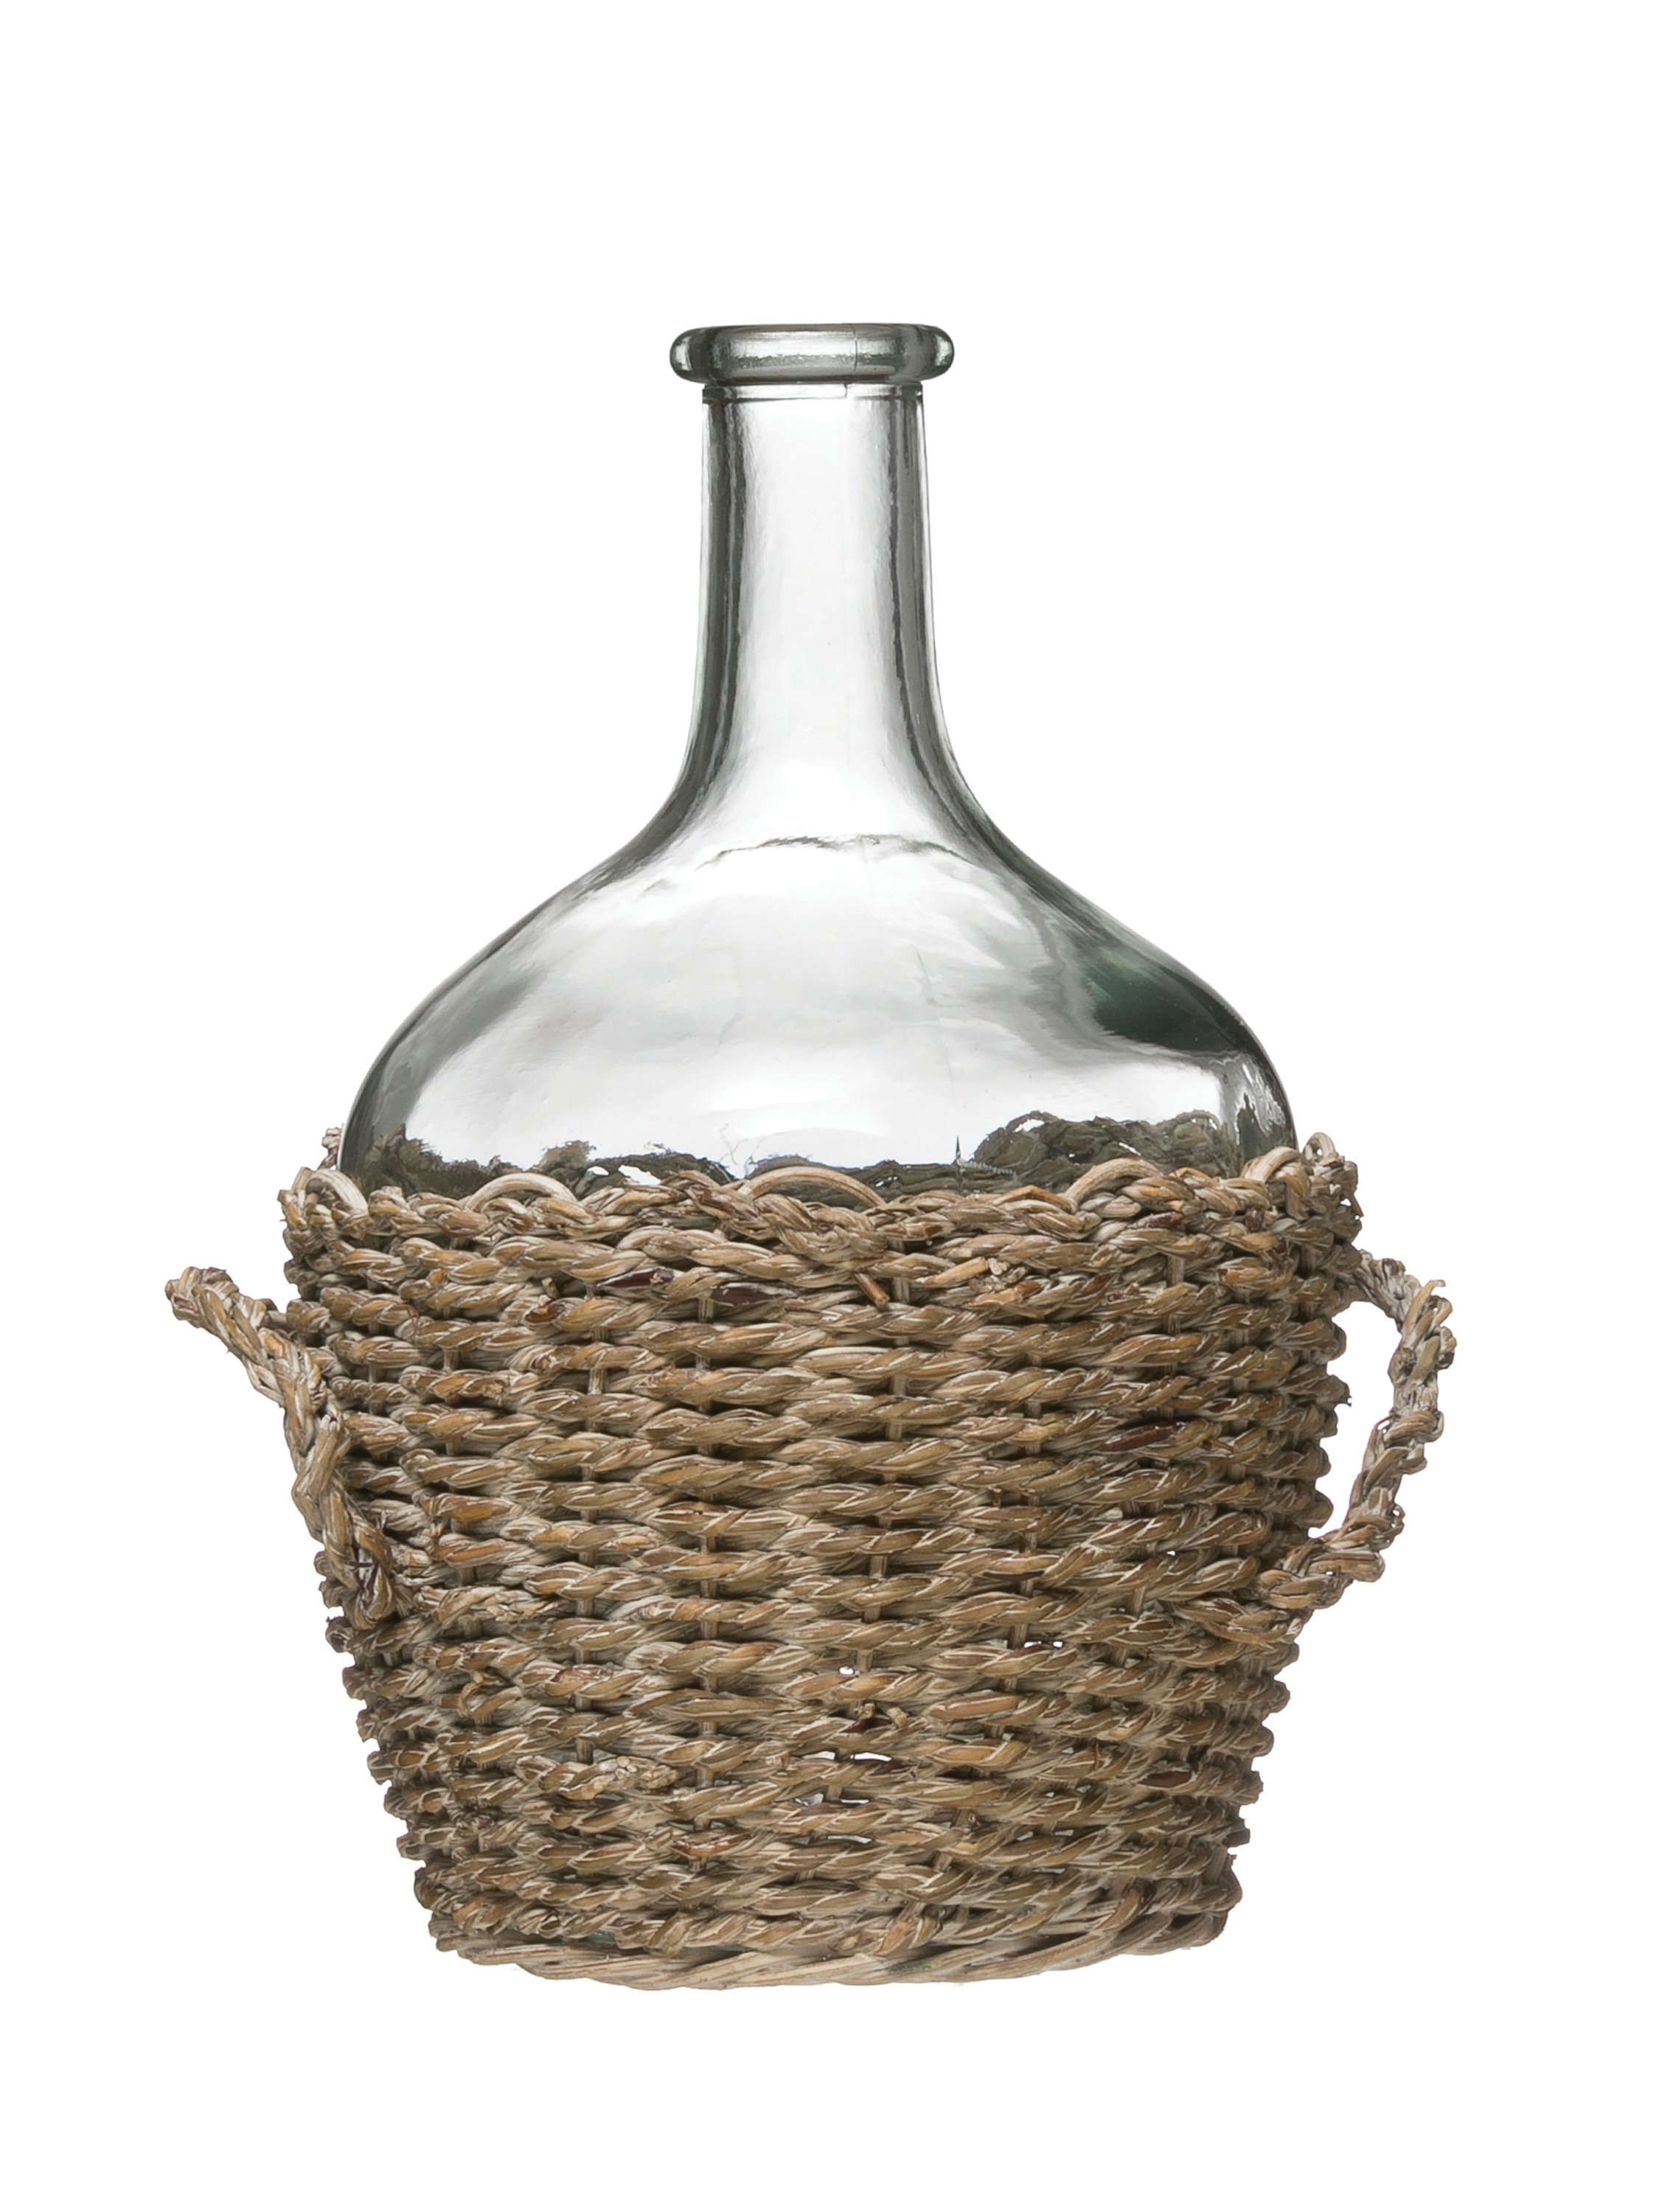 Glass Bottle in Woven Seagrass Basket with Handles - Image 0